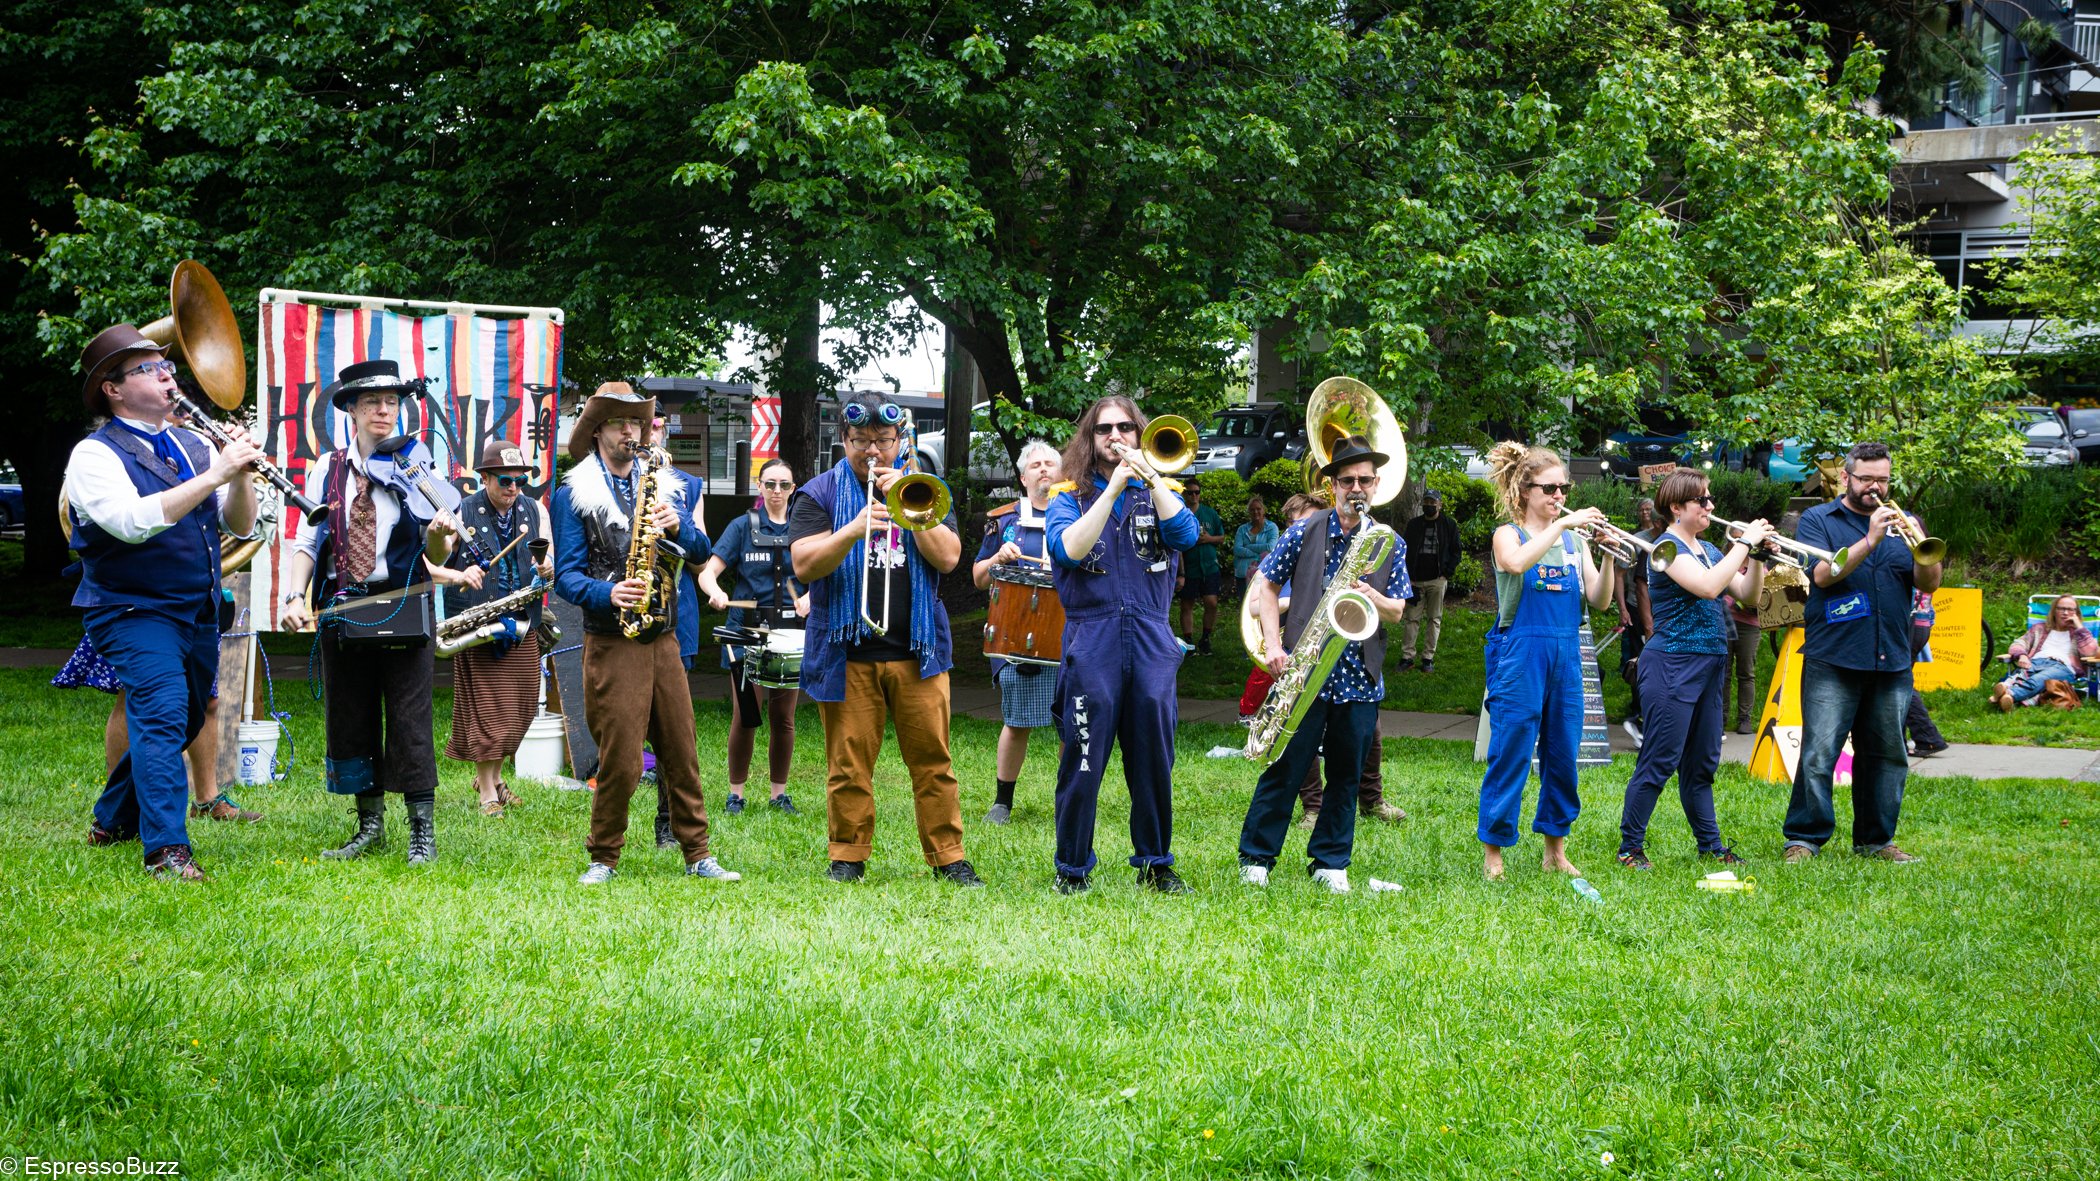 Emperor Norton's Stationary Marching Band